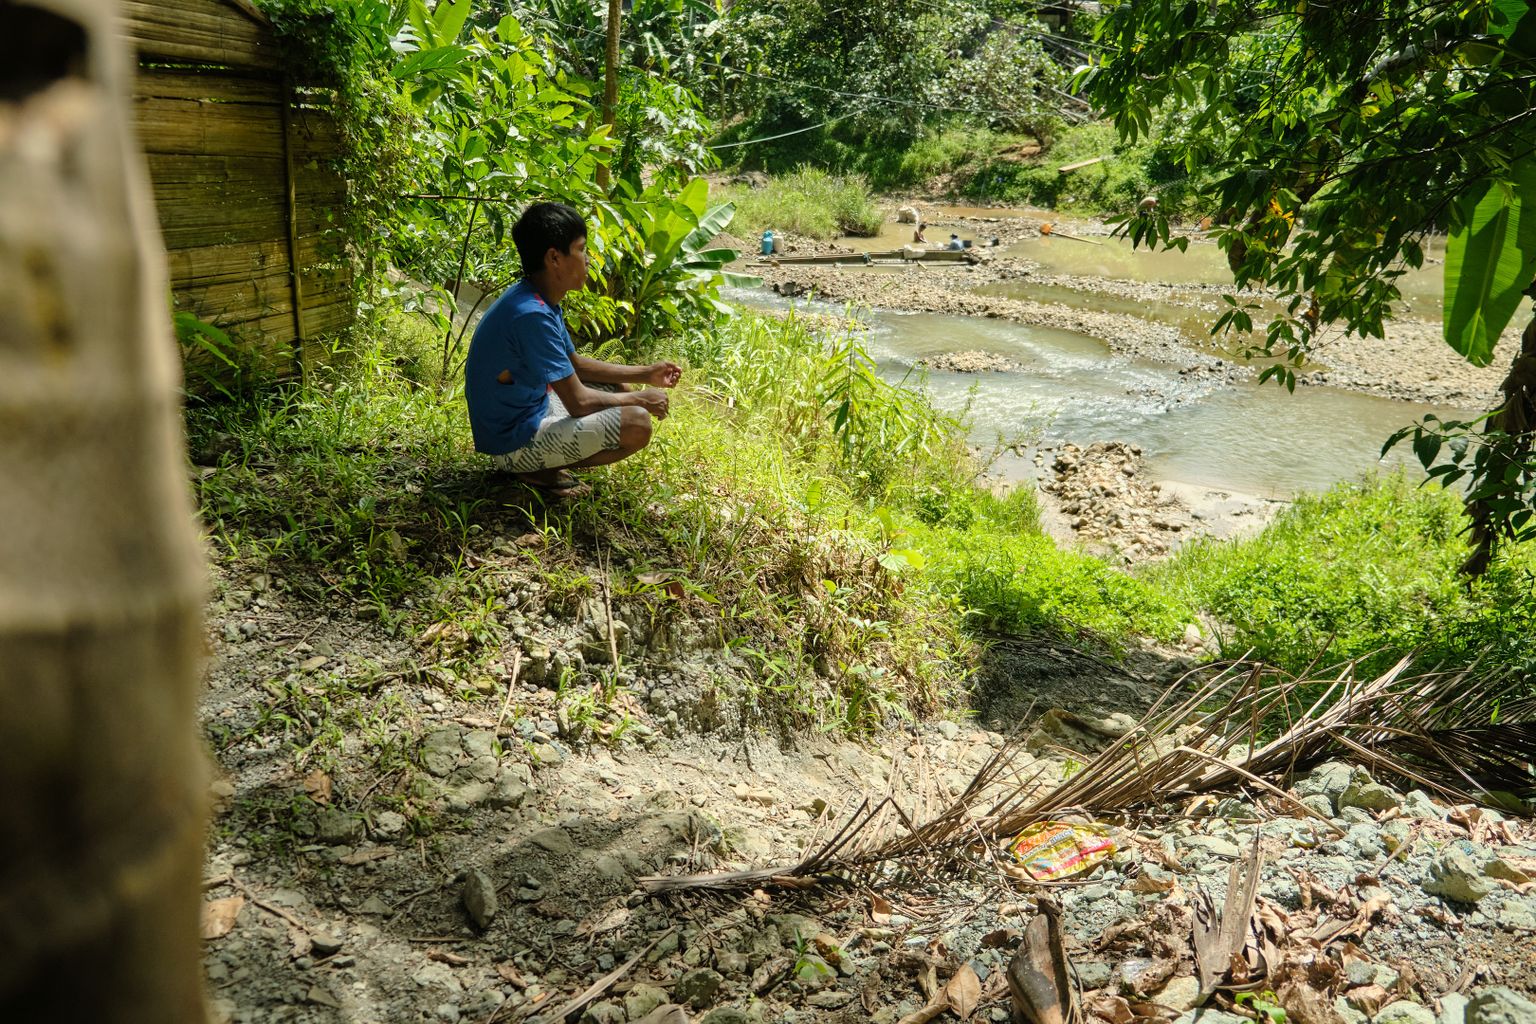 Eron Flores visits the river where artisanal and small-scale miners pan for gold.